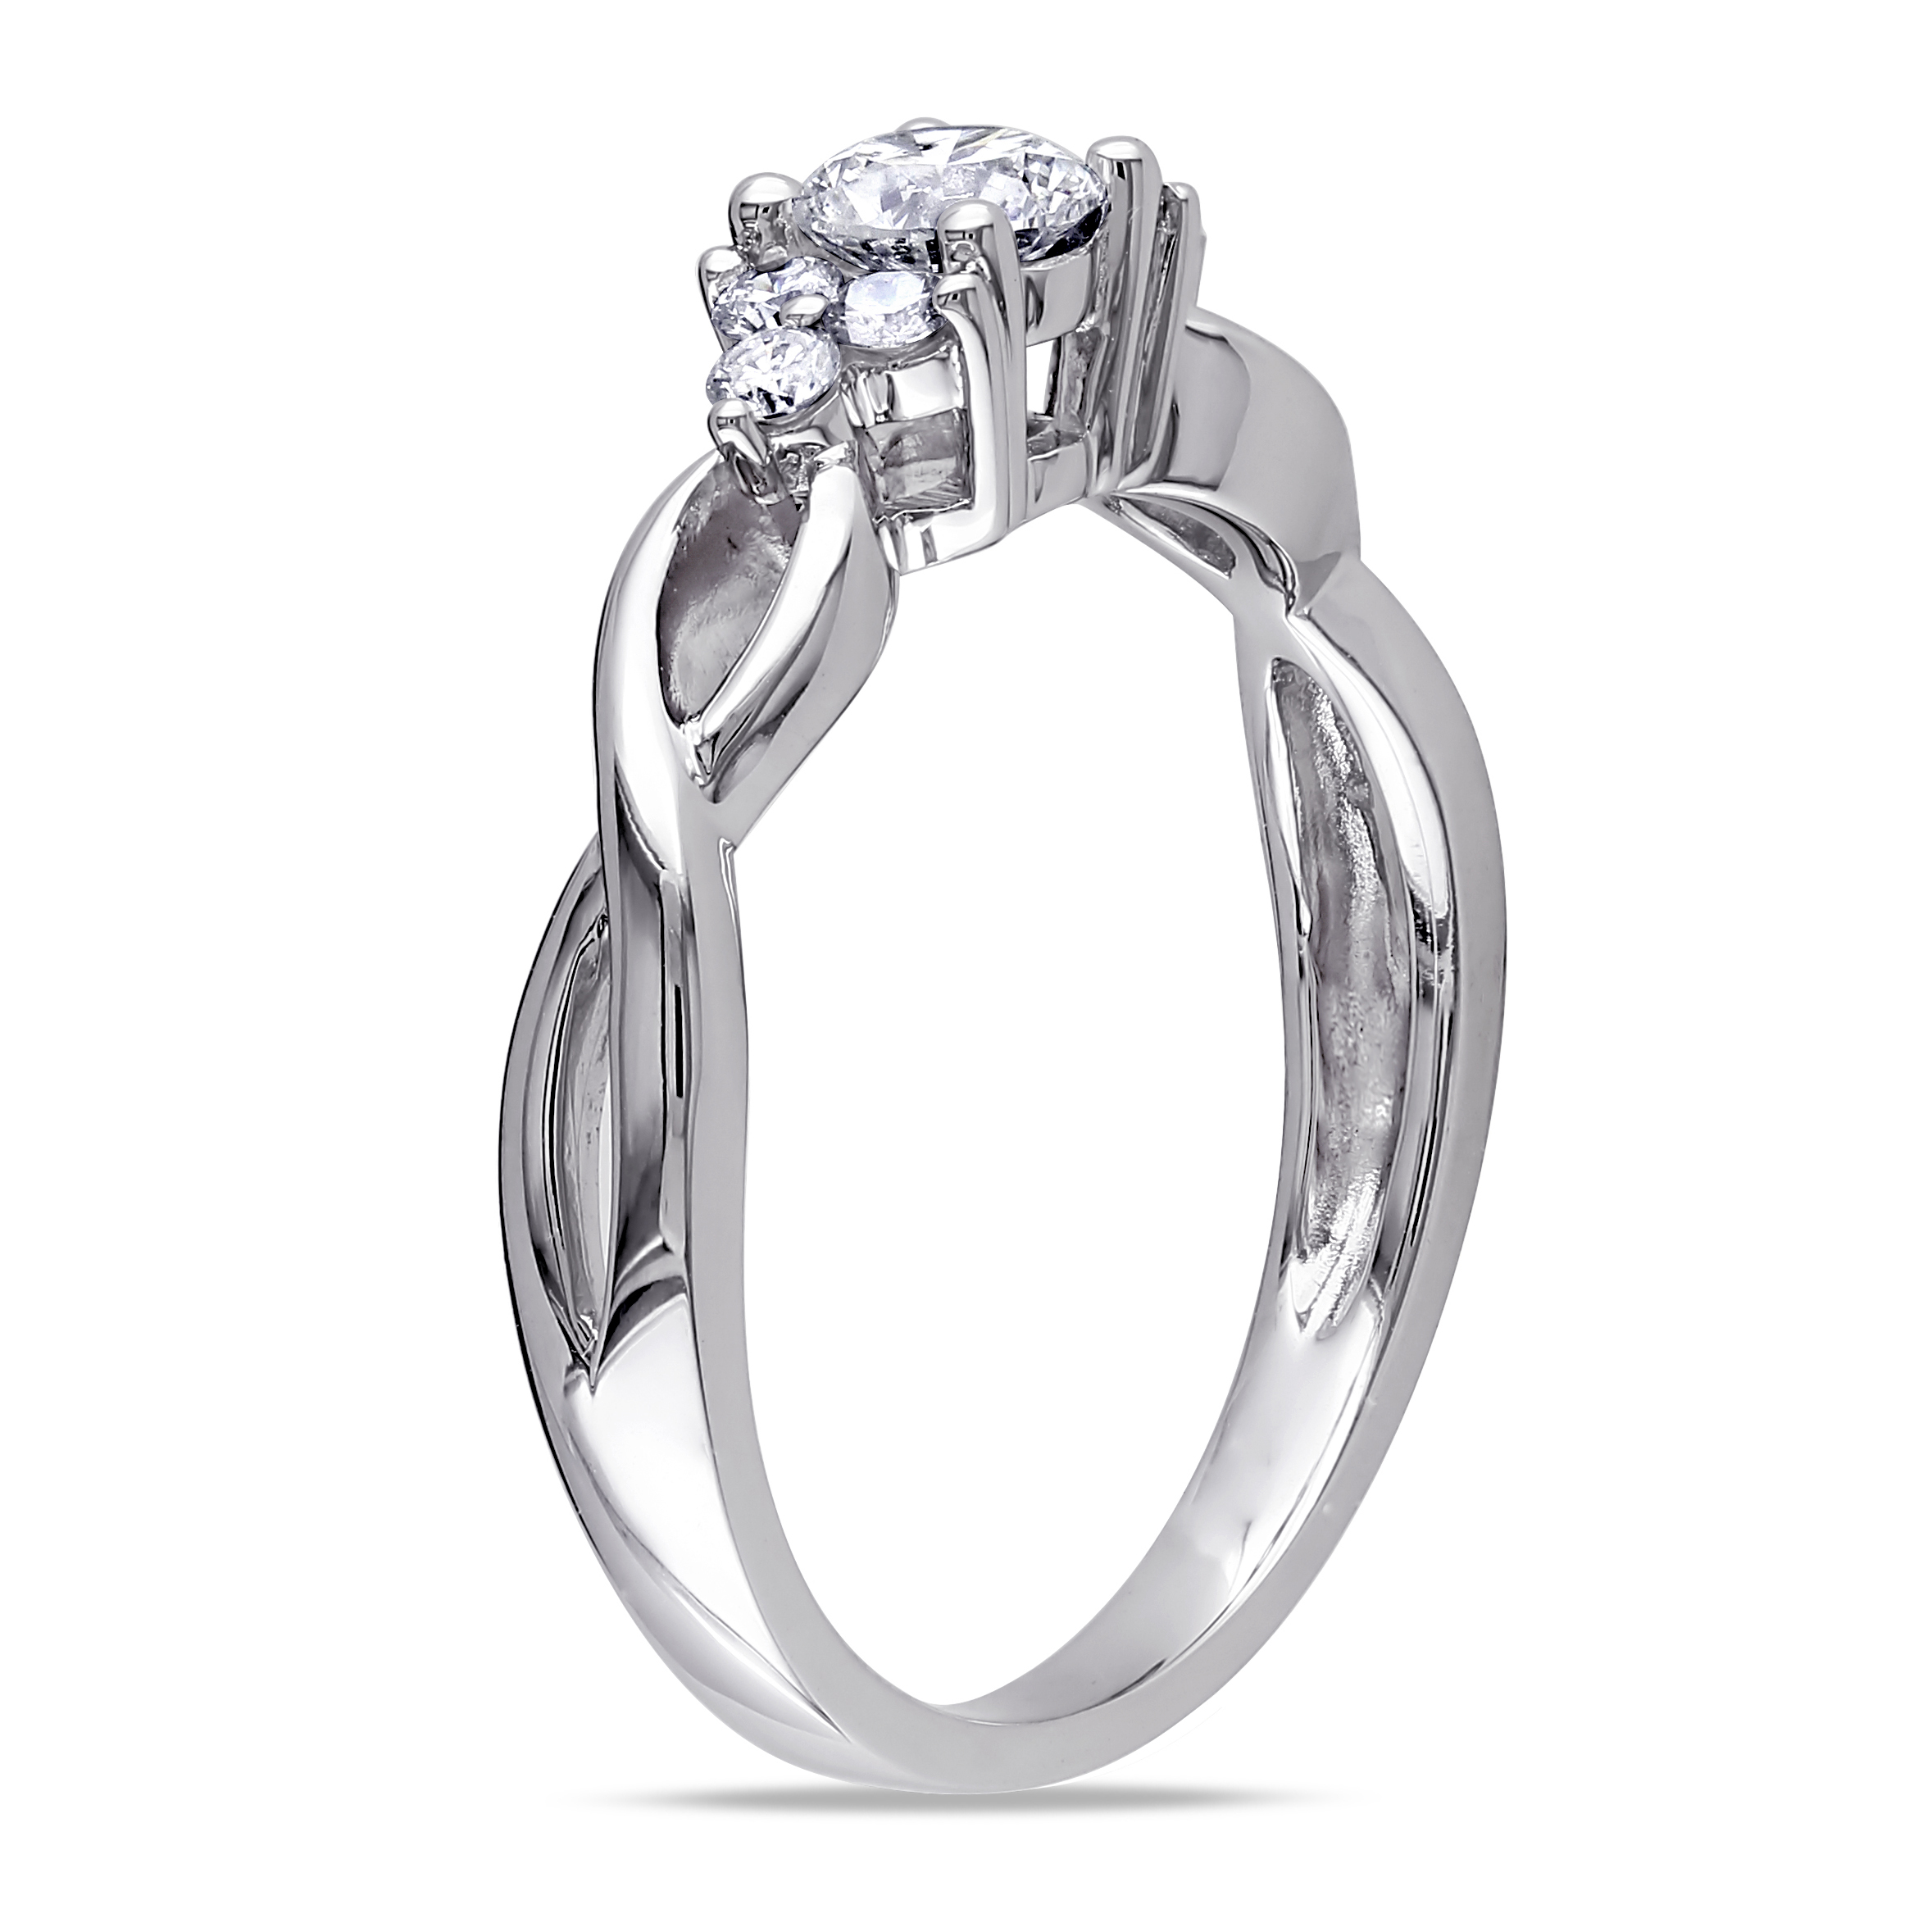 1/2 CT TW Diamond Engagement Ring in 14k White Gold